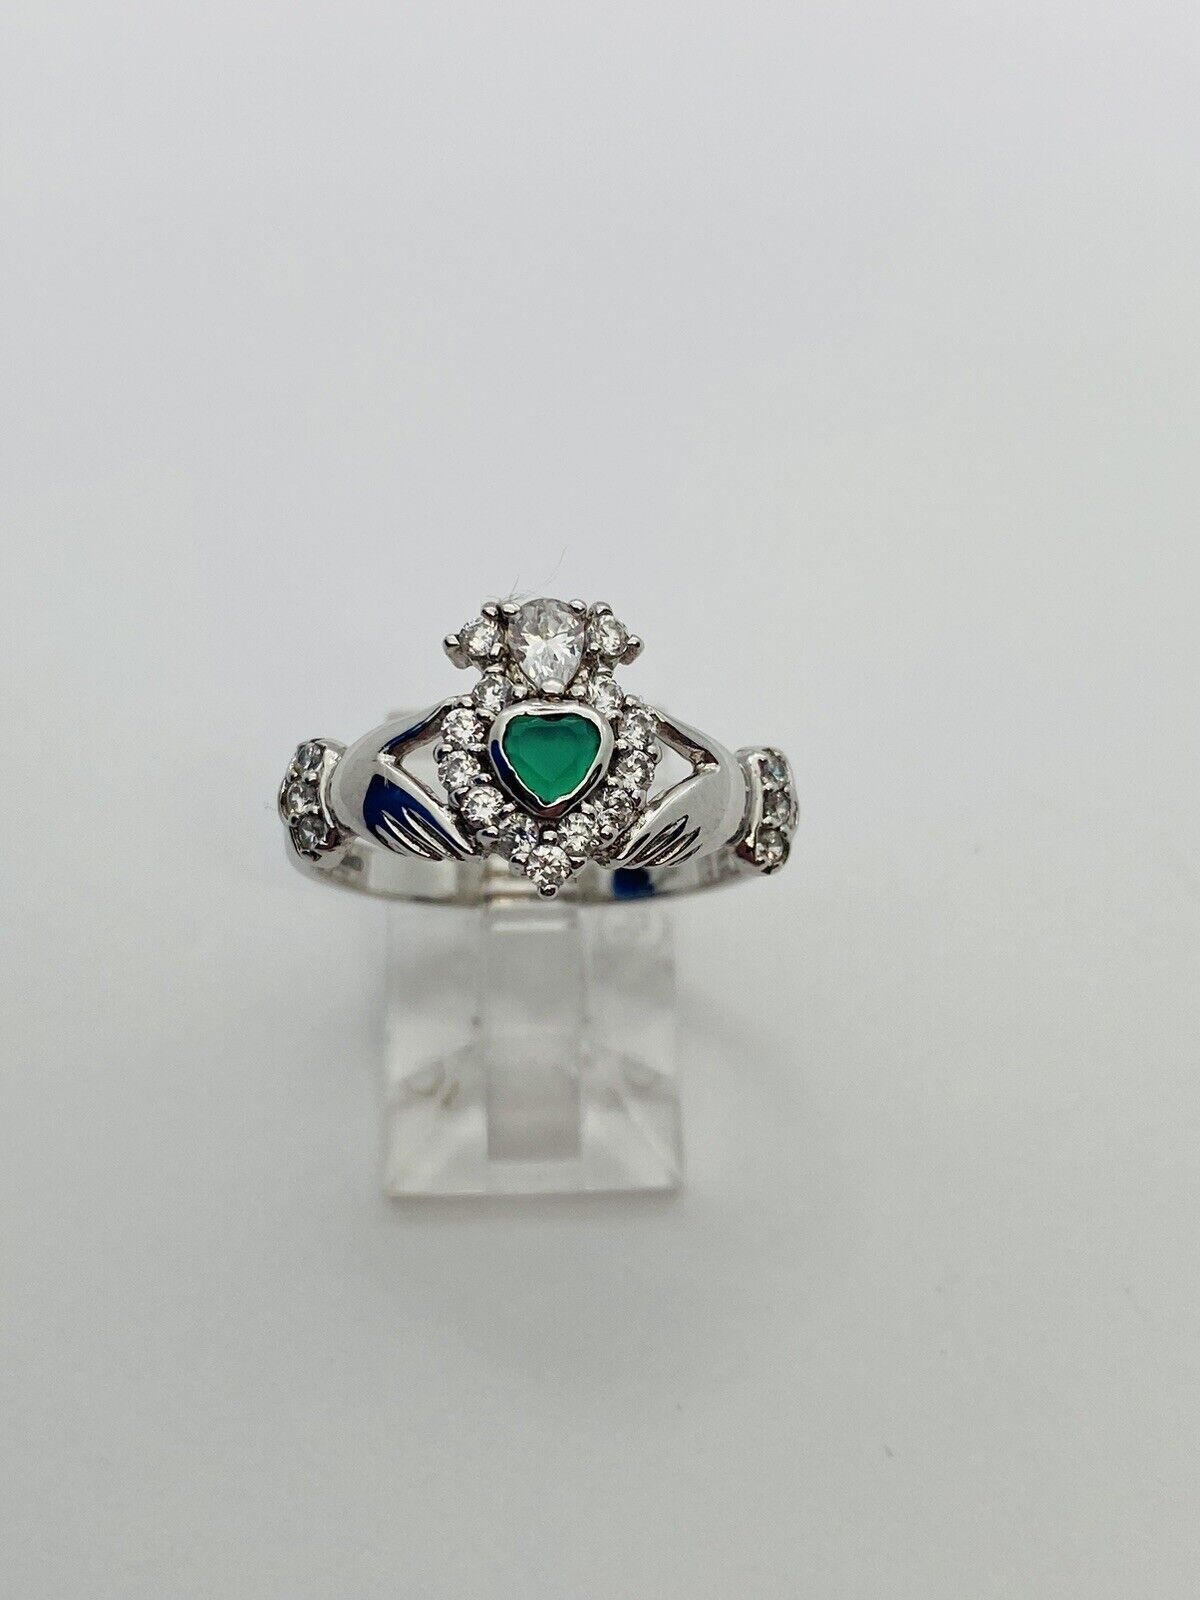 Vintage Sterling Silver Natural Emerald Claddagh Ring TJH Signed Size 9 2.7g 925